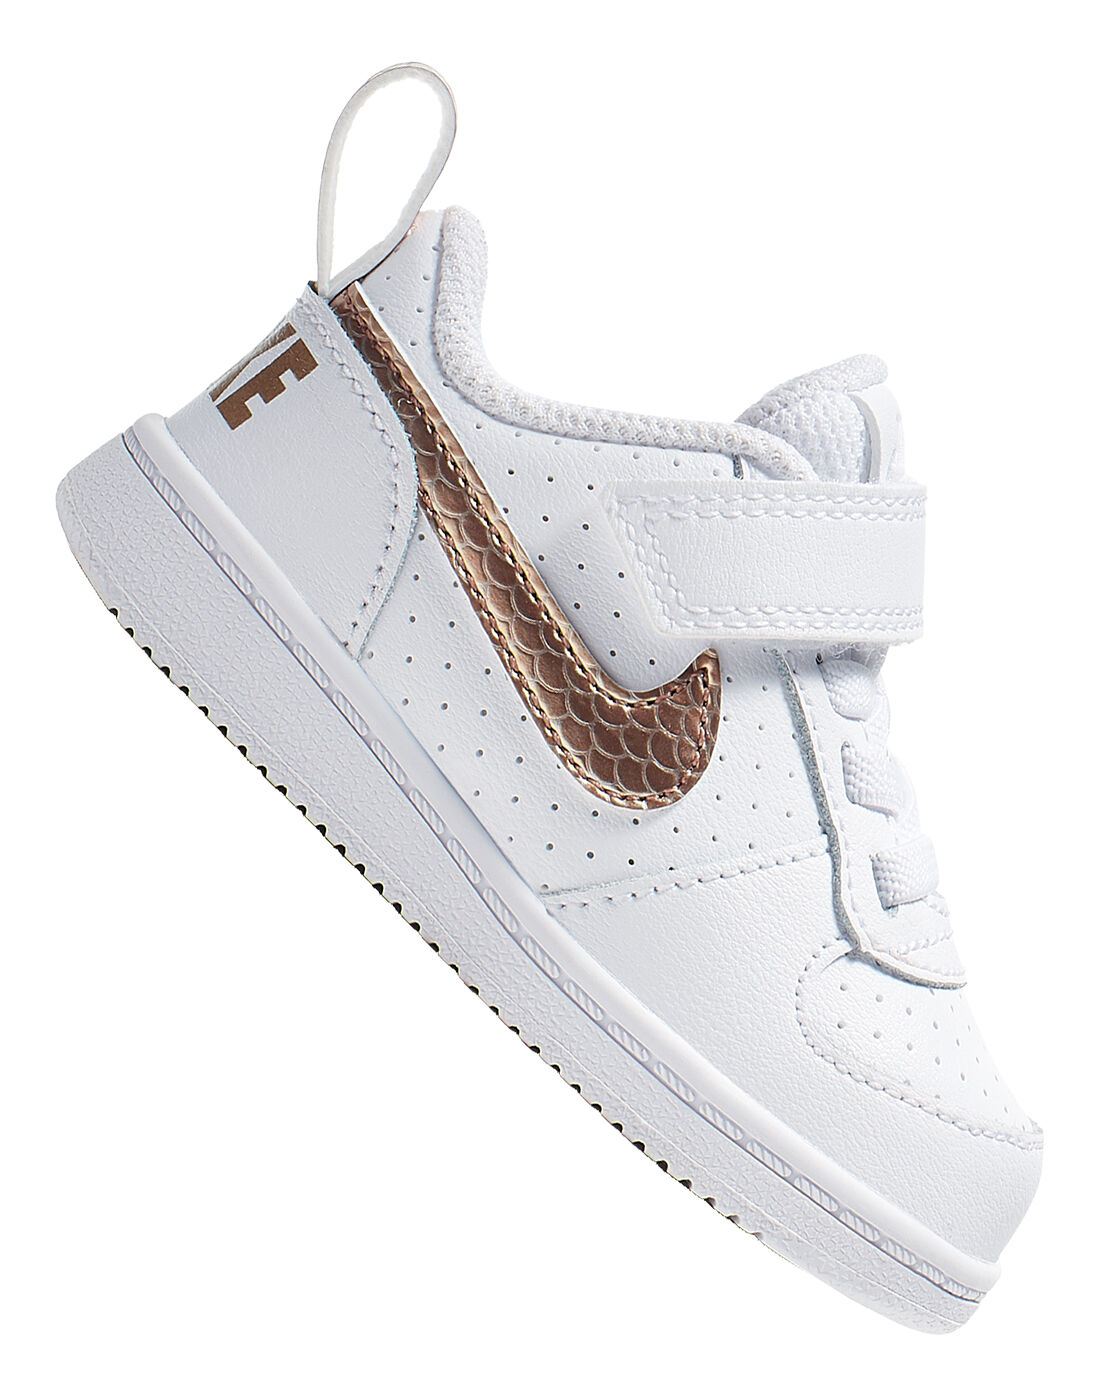 infant white nike trainers